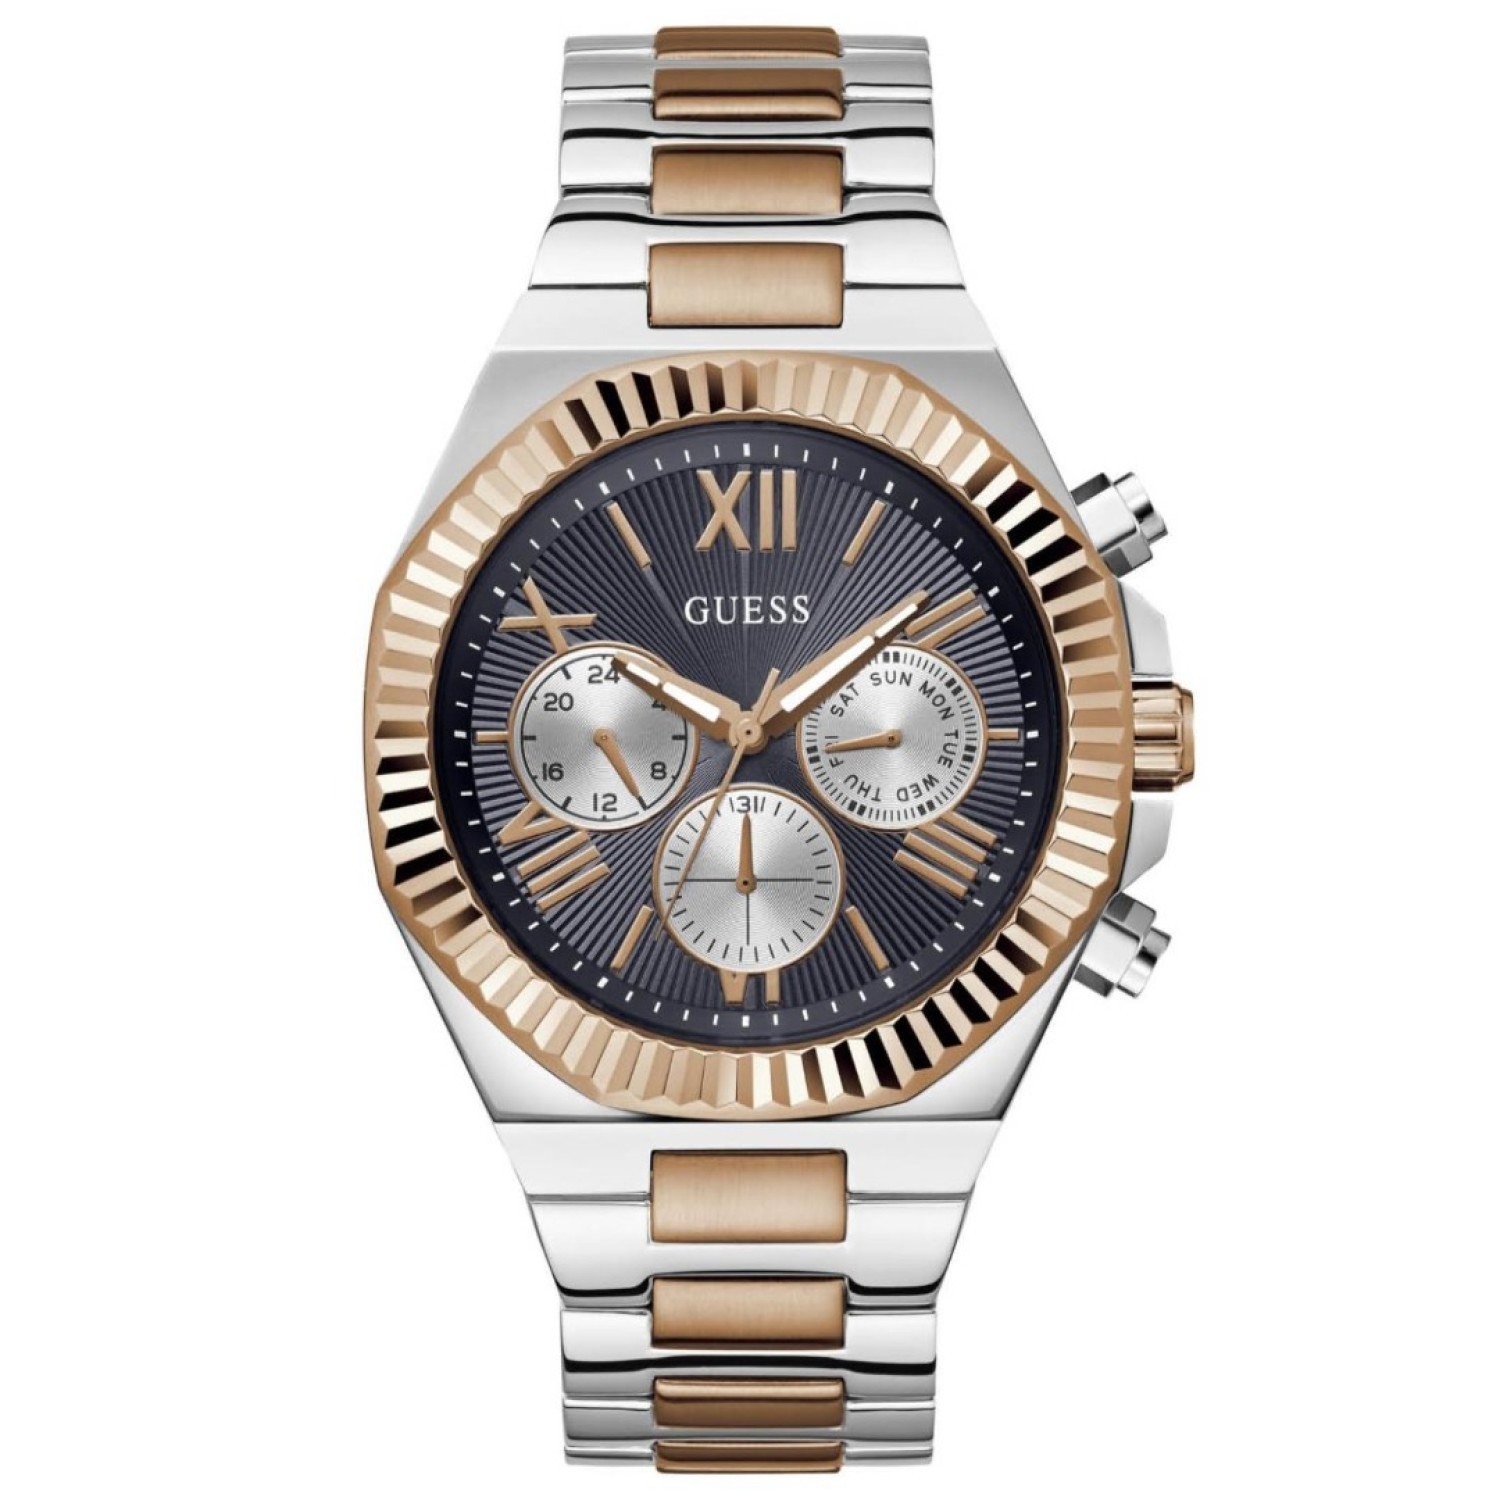 GW0703G4 Equity Men's Watch in Two-tone with Navy Blue Dial GW0703G4